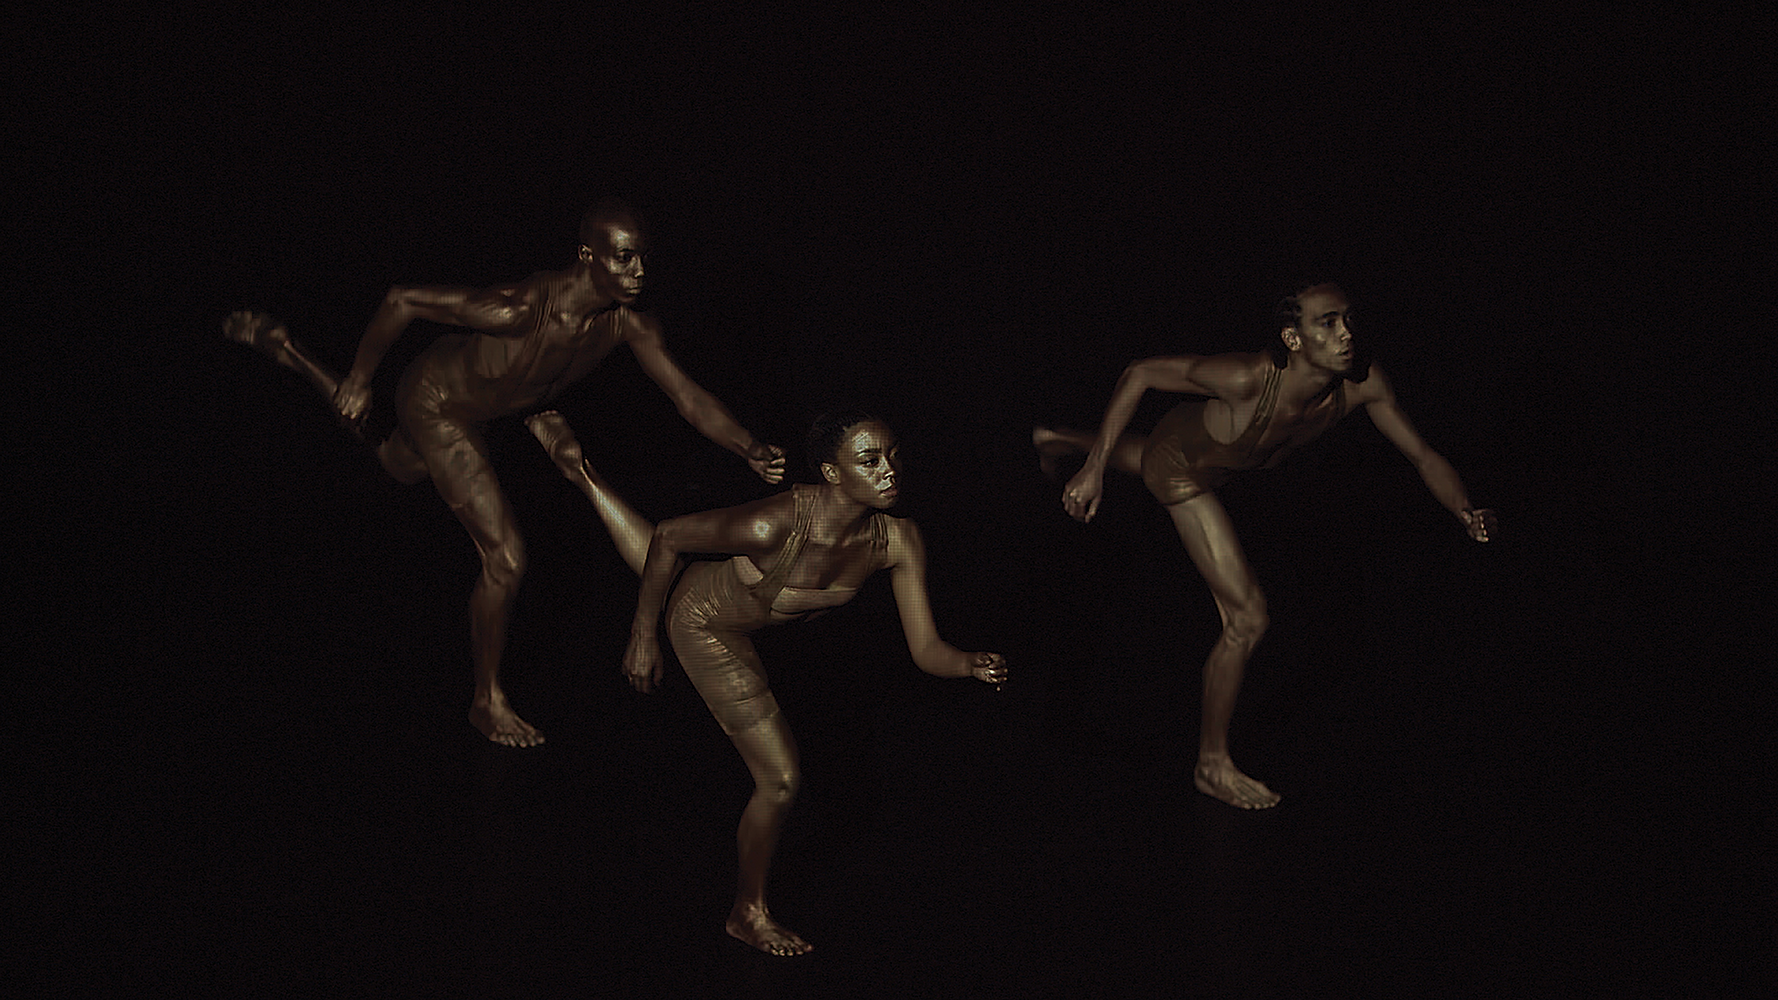 Dark performance photo of three Black performers in brown outfits running